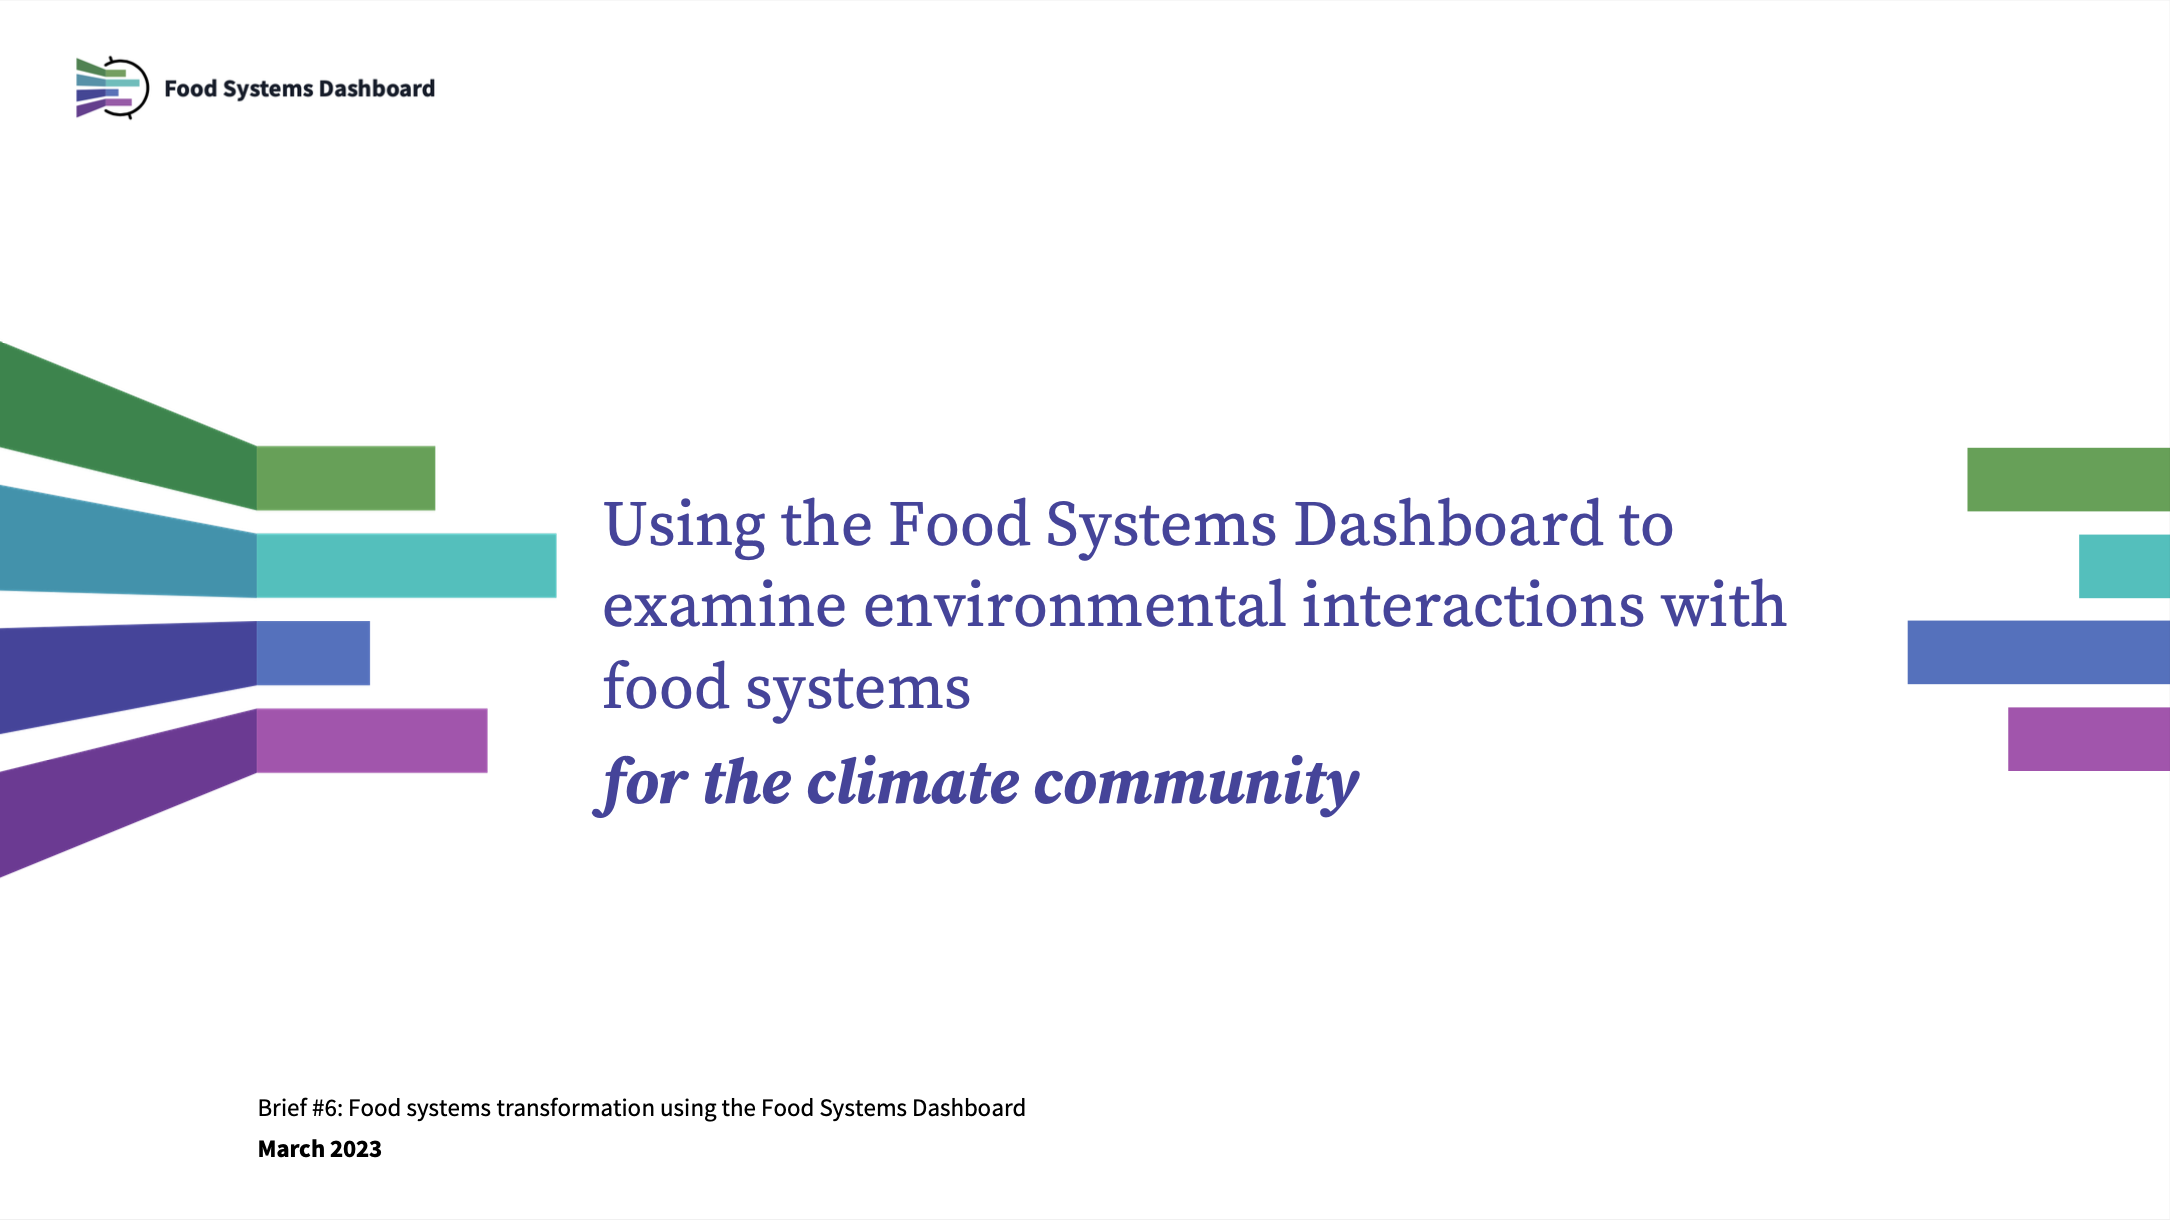 Using the Food Systems Dashboard to examine environmental interactions with food systems